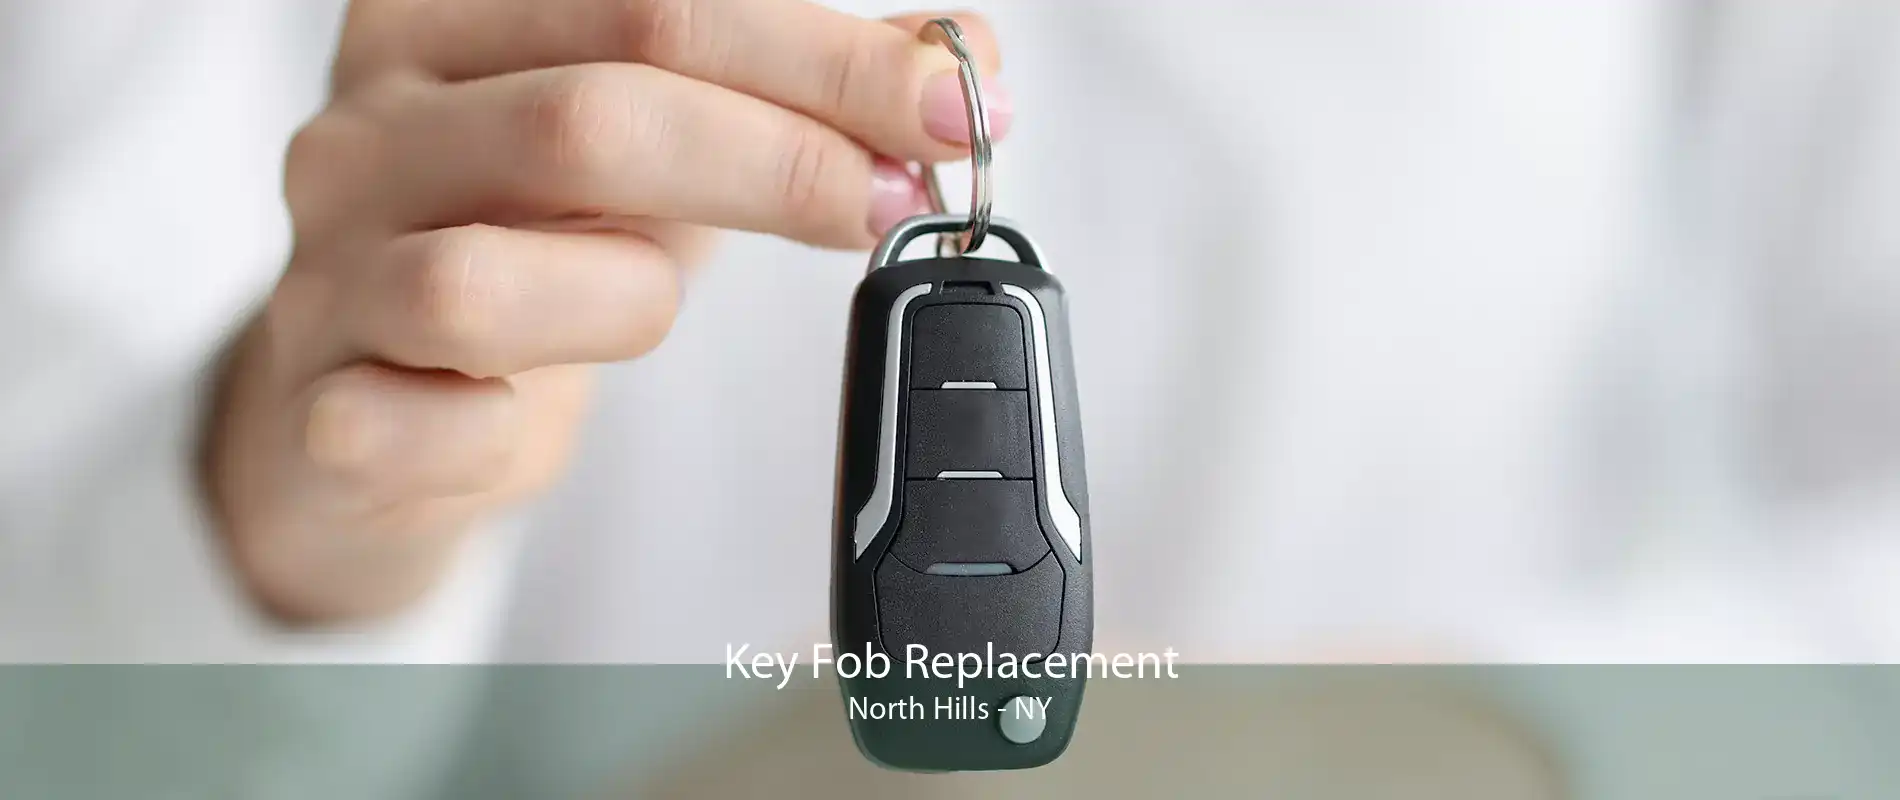 Key Fob Replacement North Hills - NY